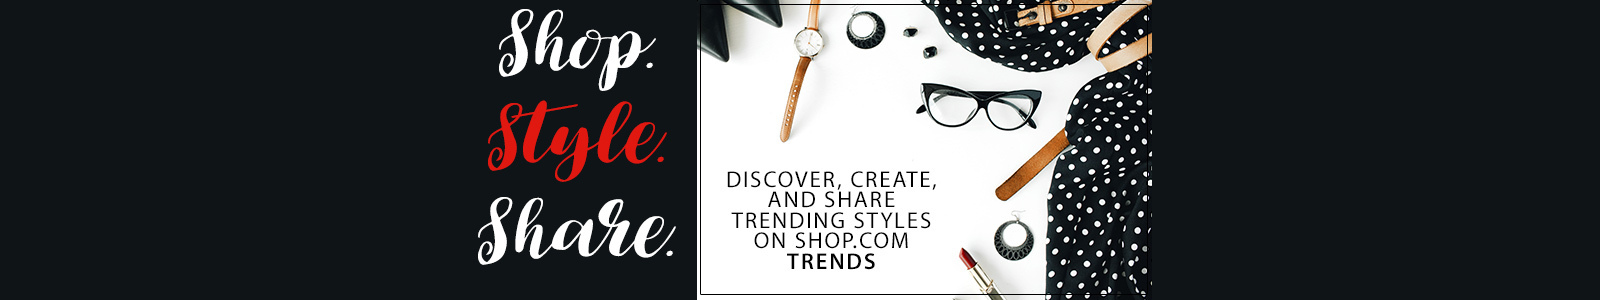 Shop. Style. Share. Discover, create and share trending styles on SHOP.COM Trends.